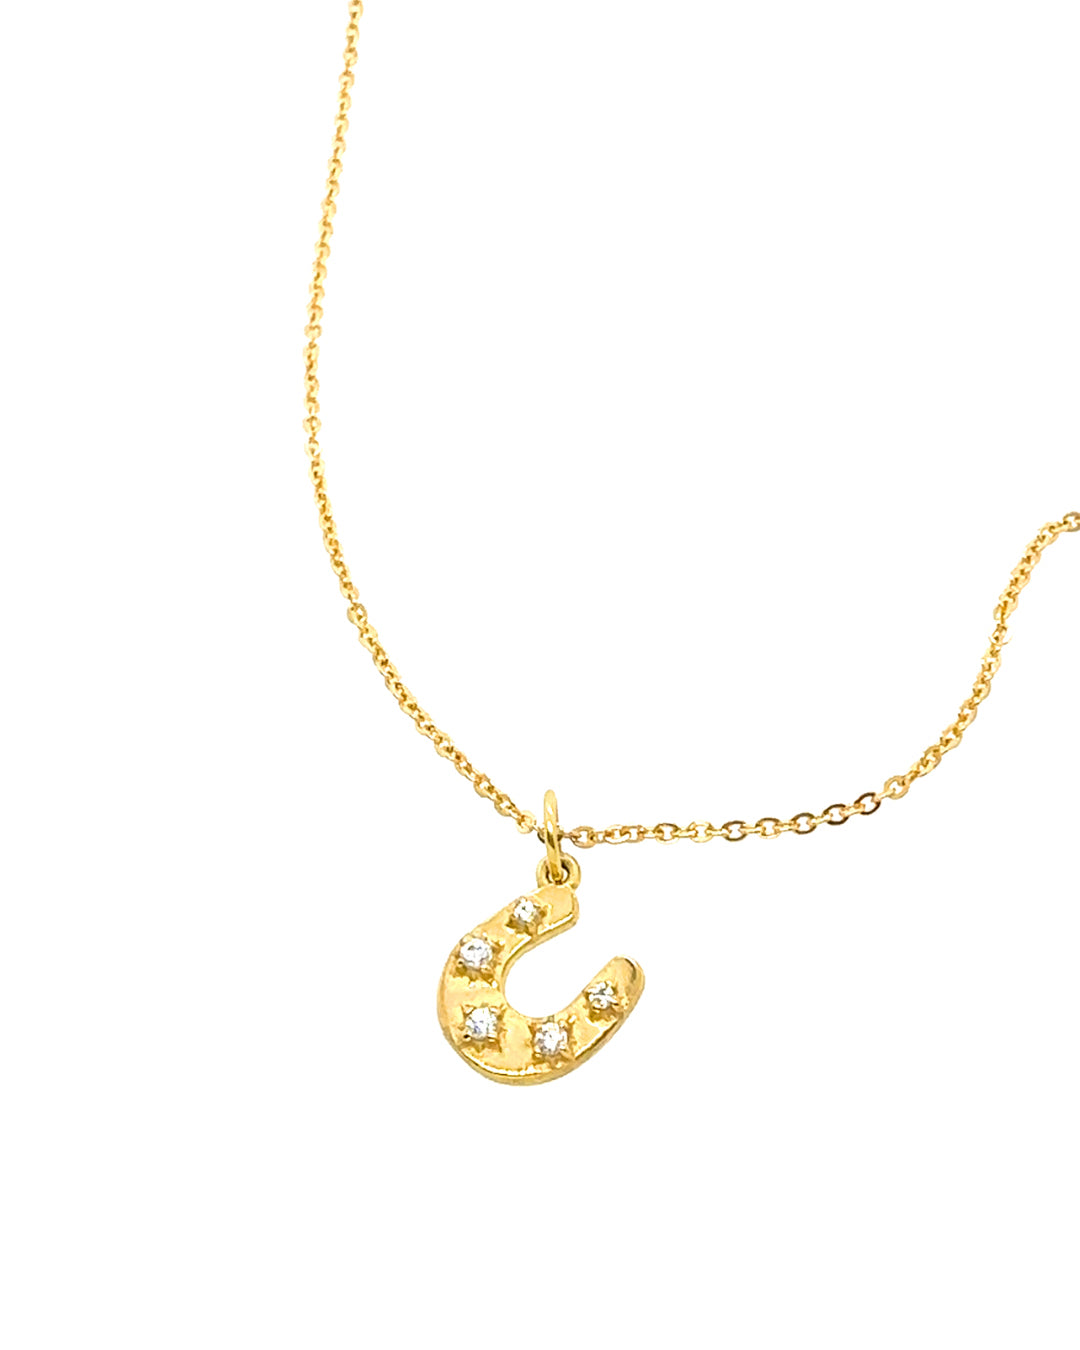 Gold fill evil eye horseshoe talisman protection pendant on a gold necklace cable chain